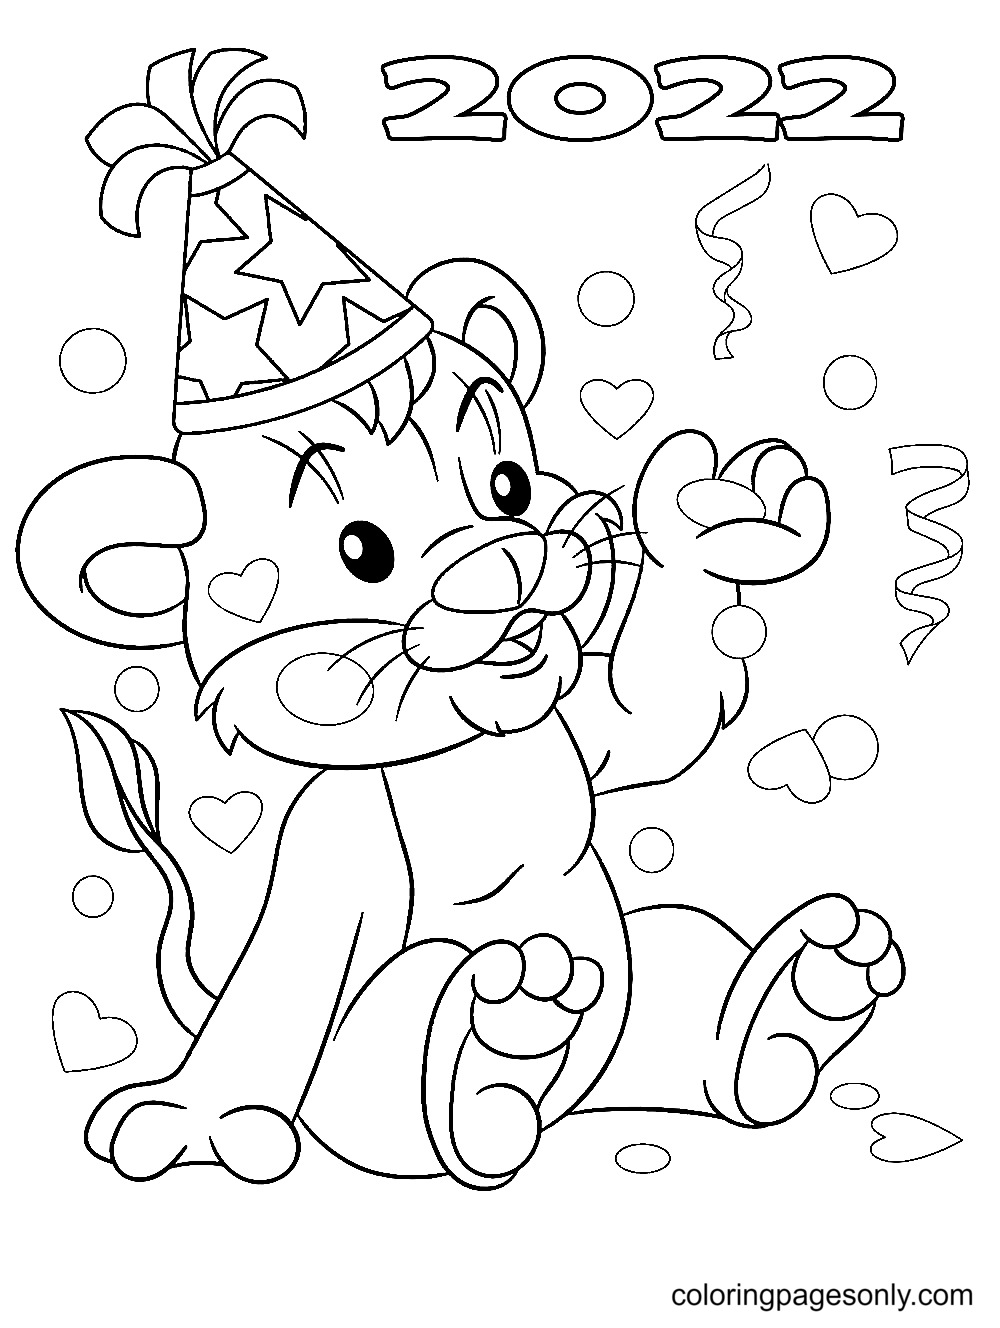 Cute 2022 Tiger Coloring Page